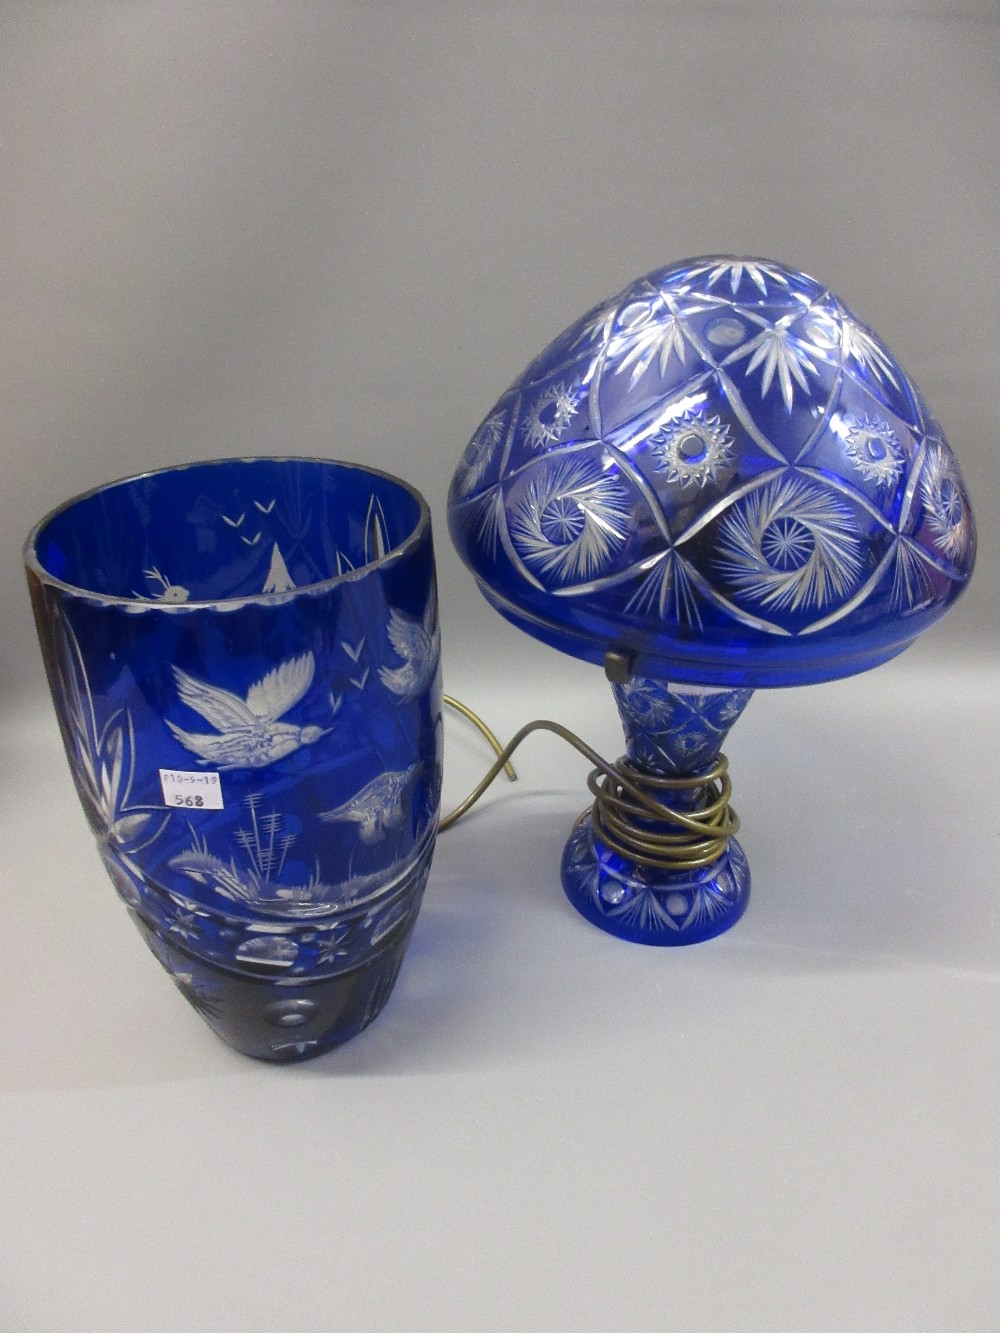 Bohemian blue overlay clear glass mushroom form table lamp, together with a similar vase engraved